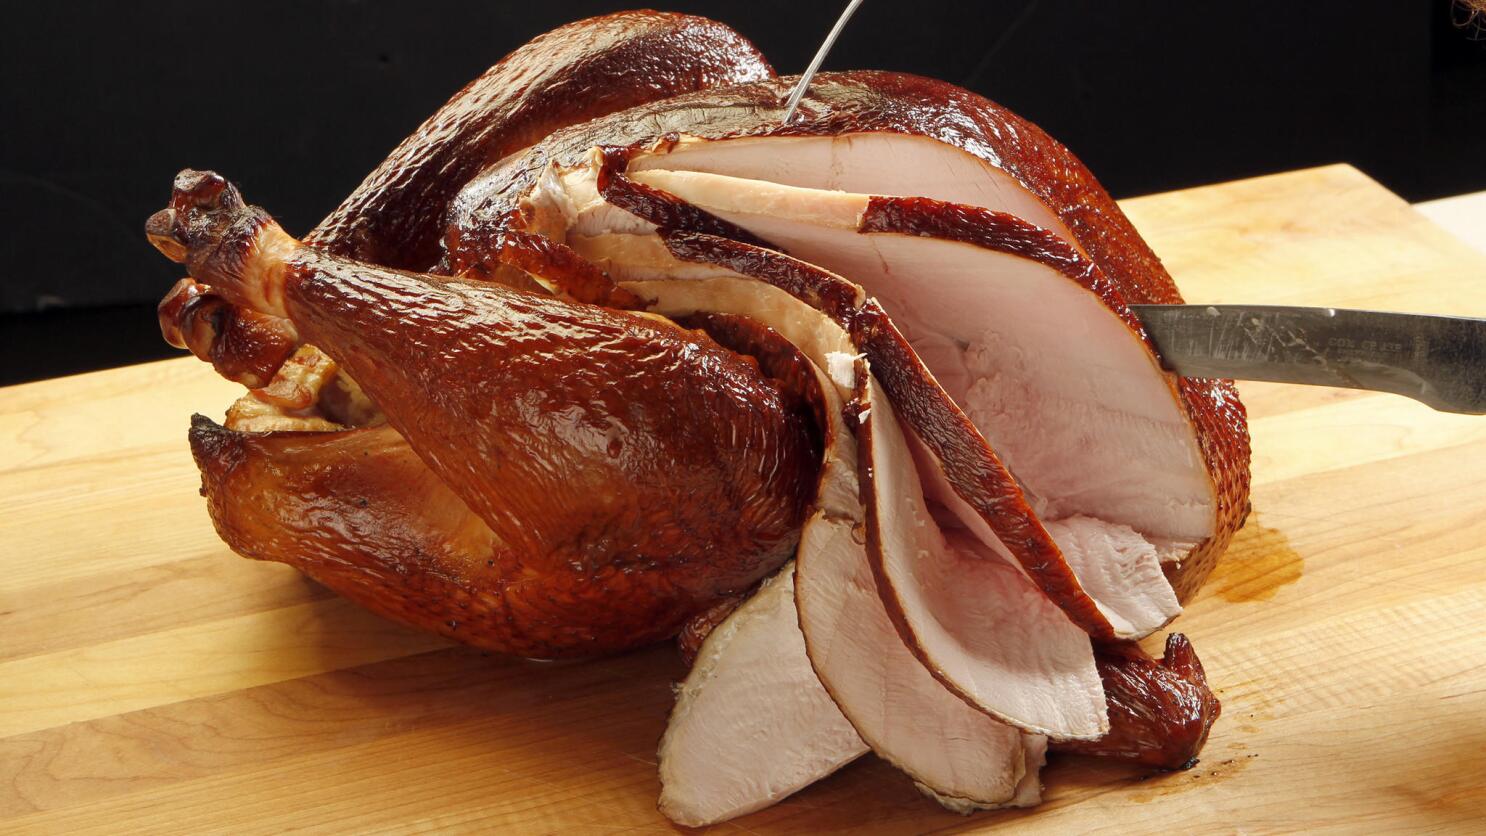 Turkey cooking tips: Pop-up thermometers not always reliable